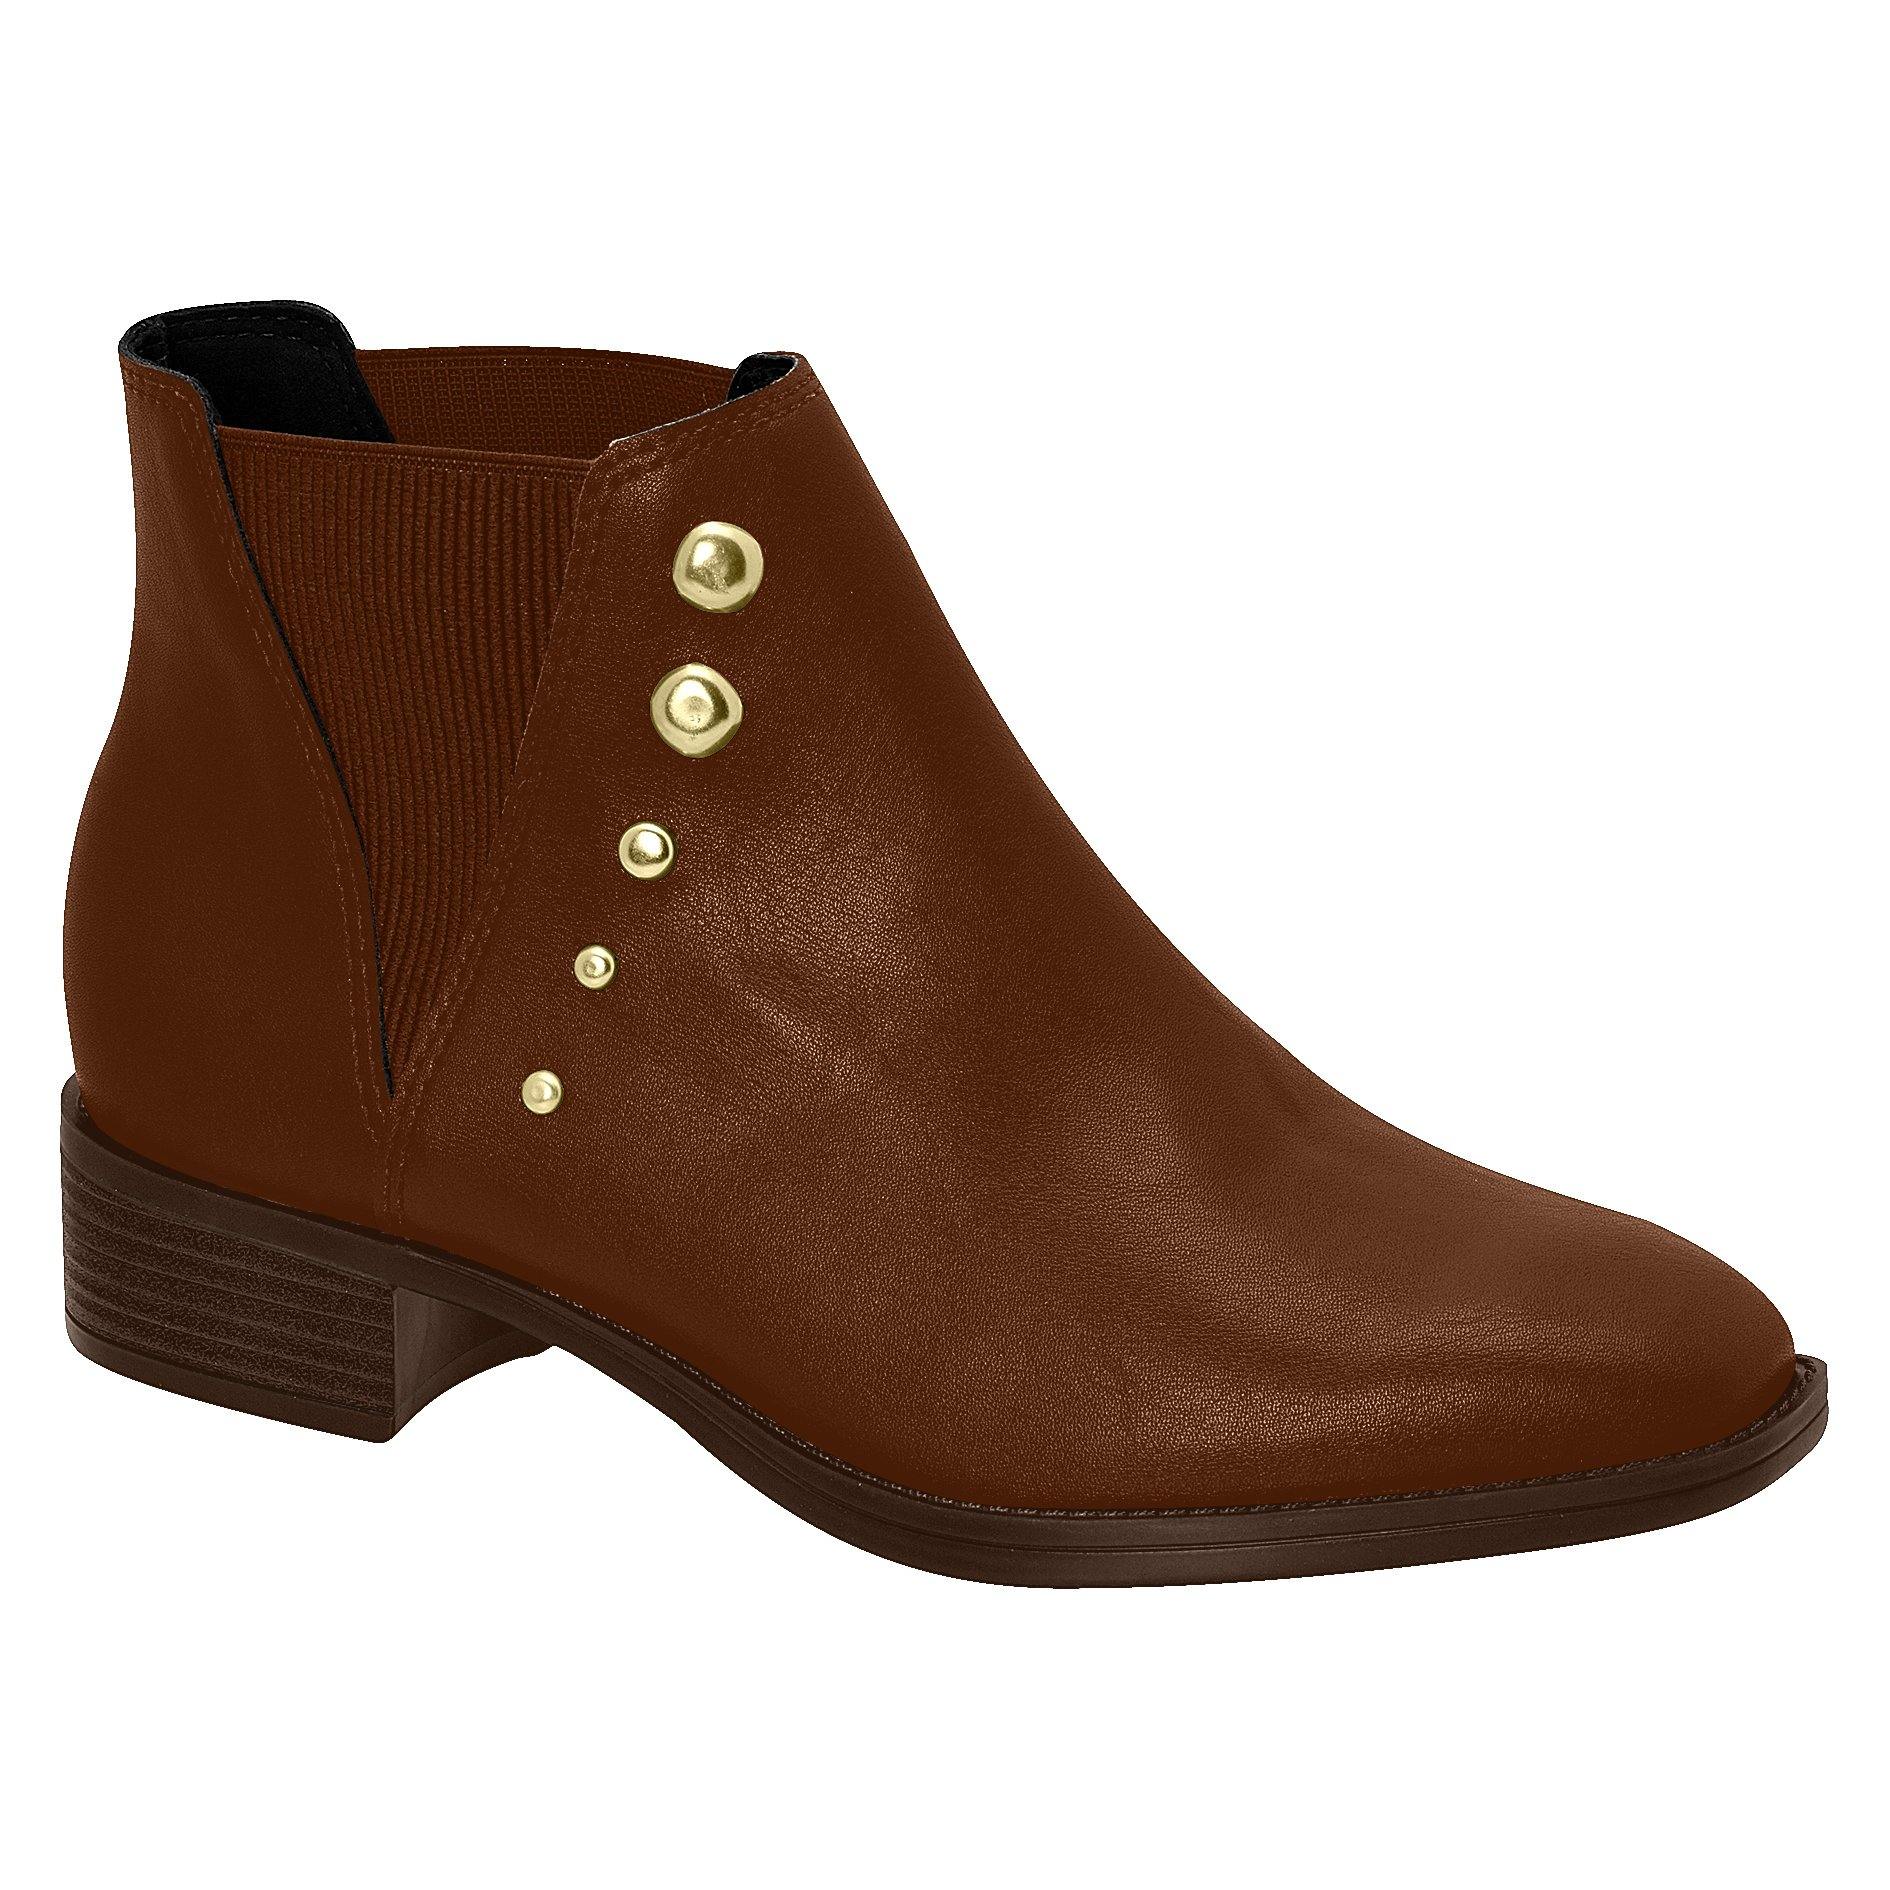 Beira Rio 9072-101 Round Toe Flat Ankle Boot in Pine Napa - Charley Boutique